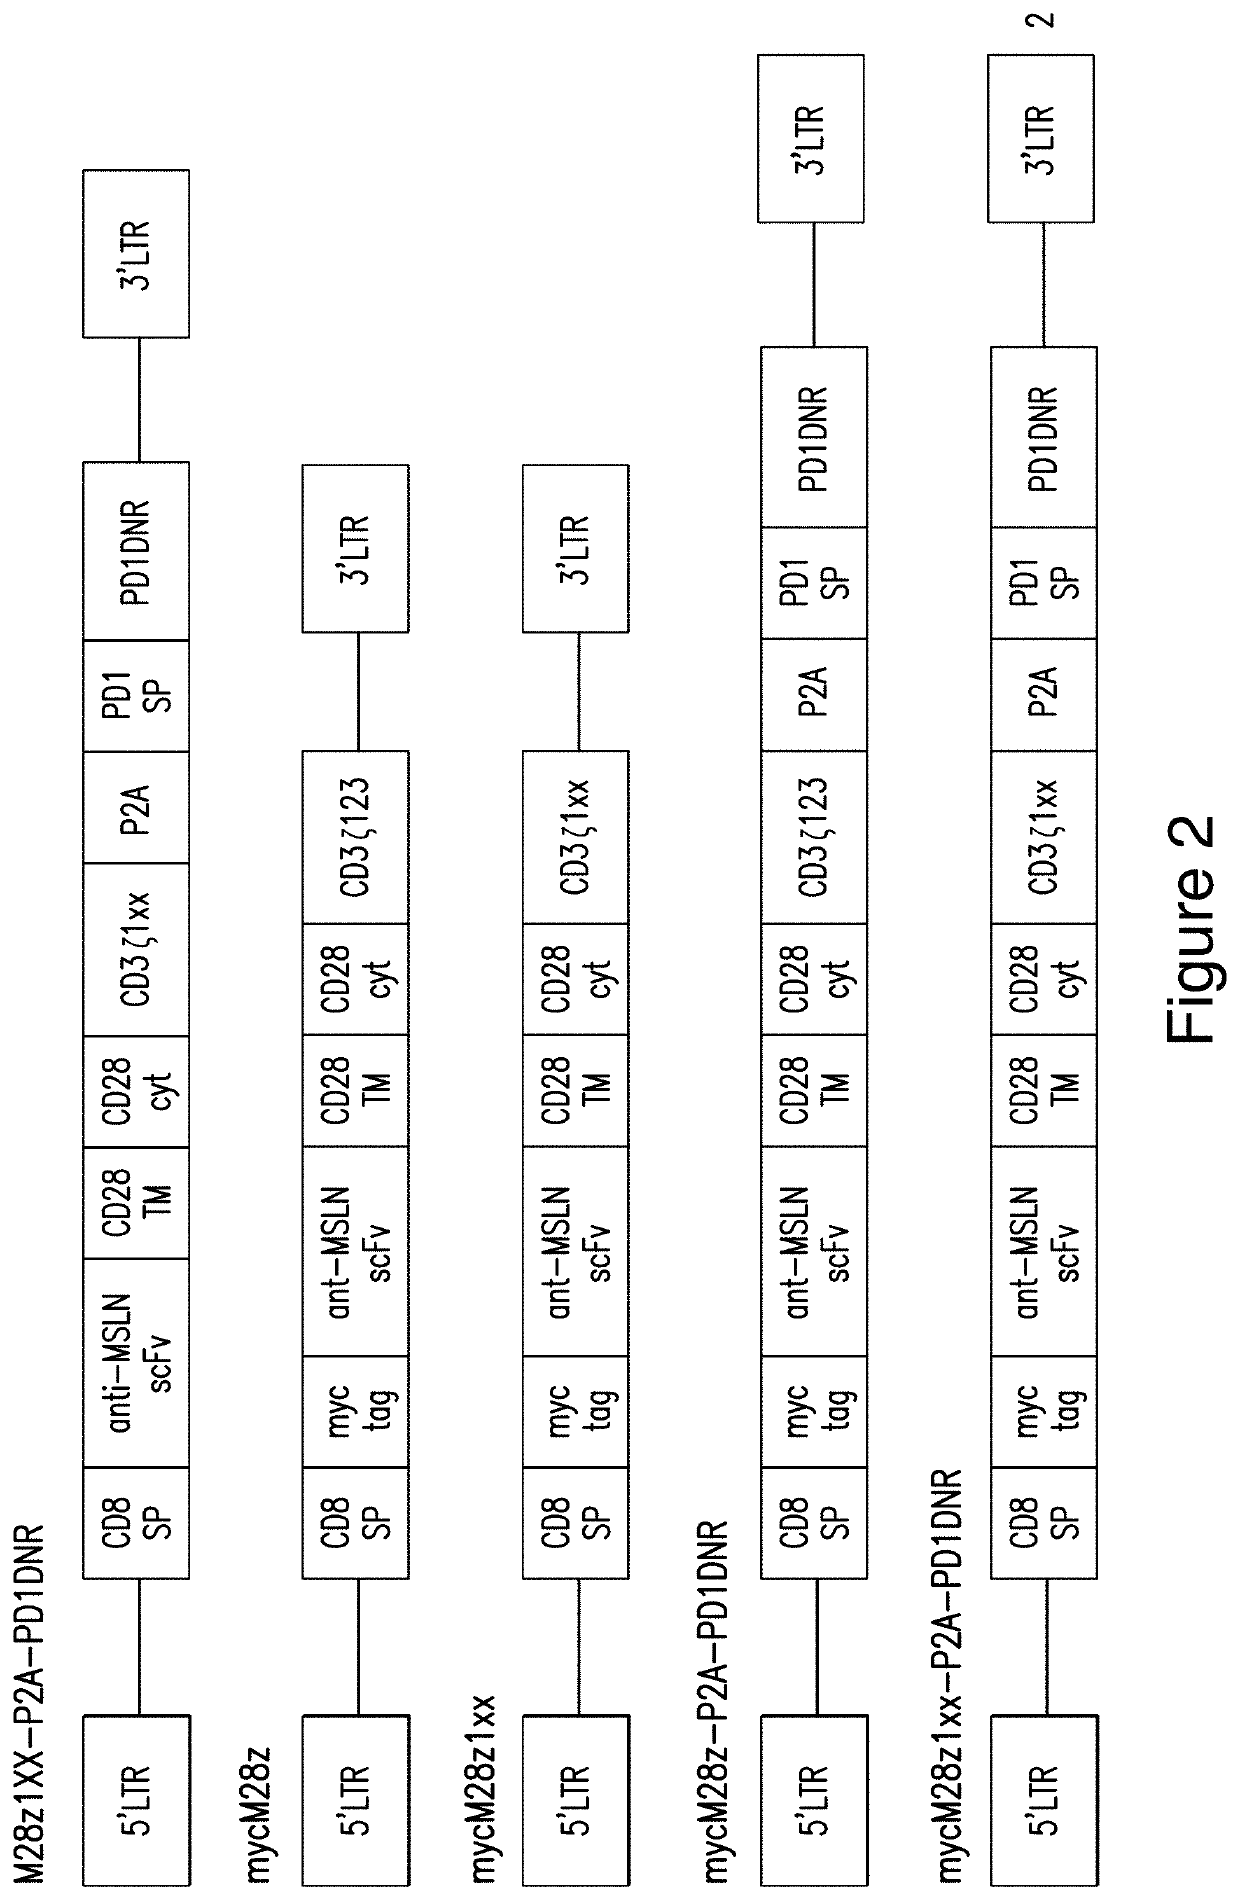 Mesothelin cars and uses thereof